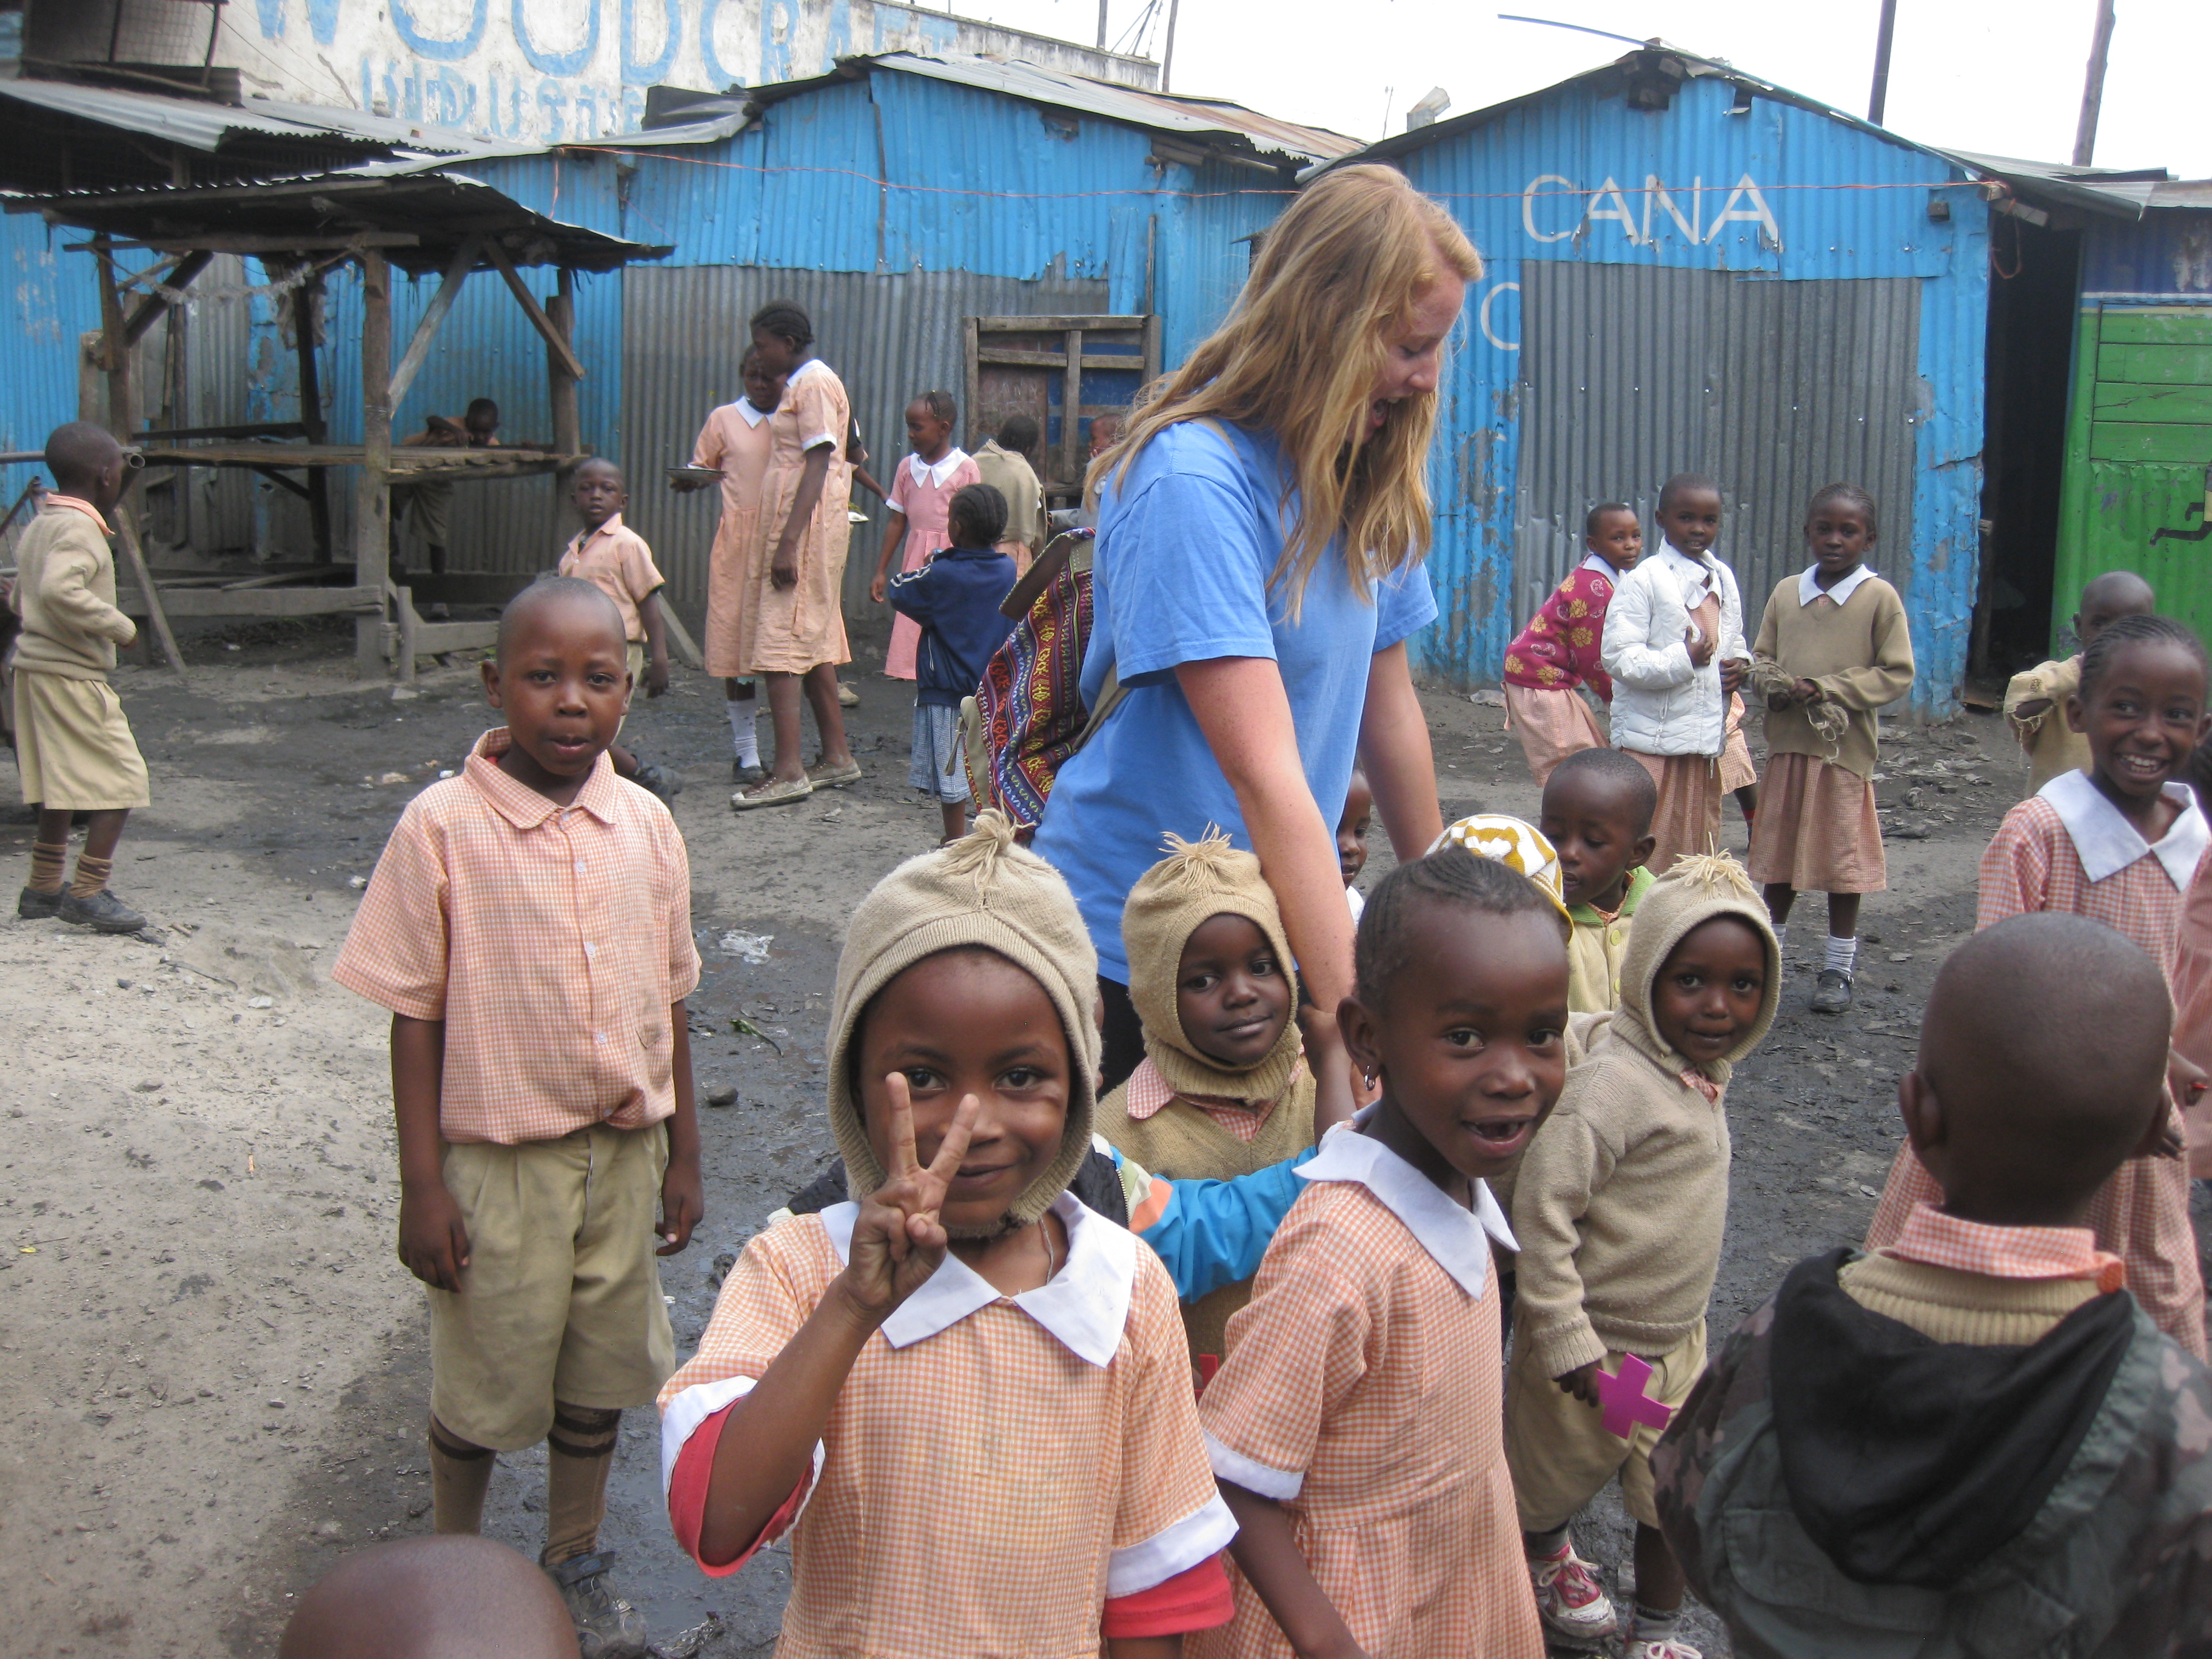 Kylie playing with children at Cana School in the Mukuru slums.